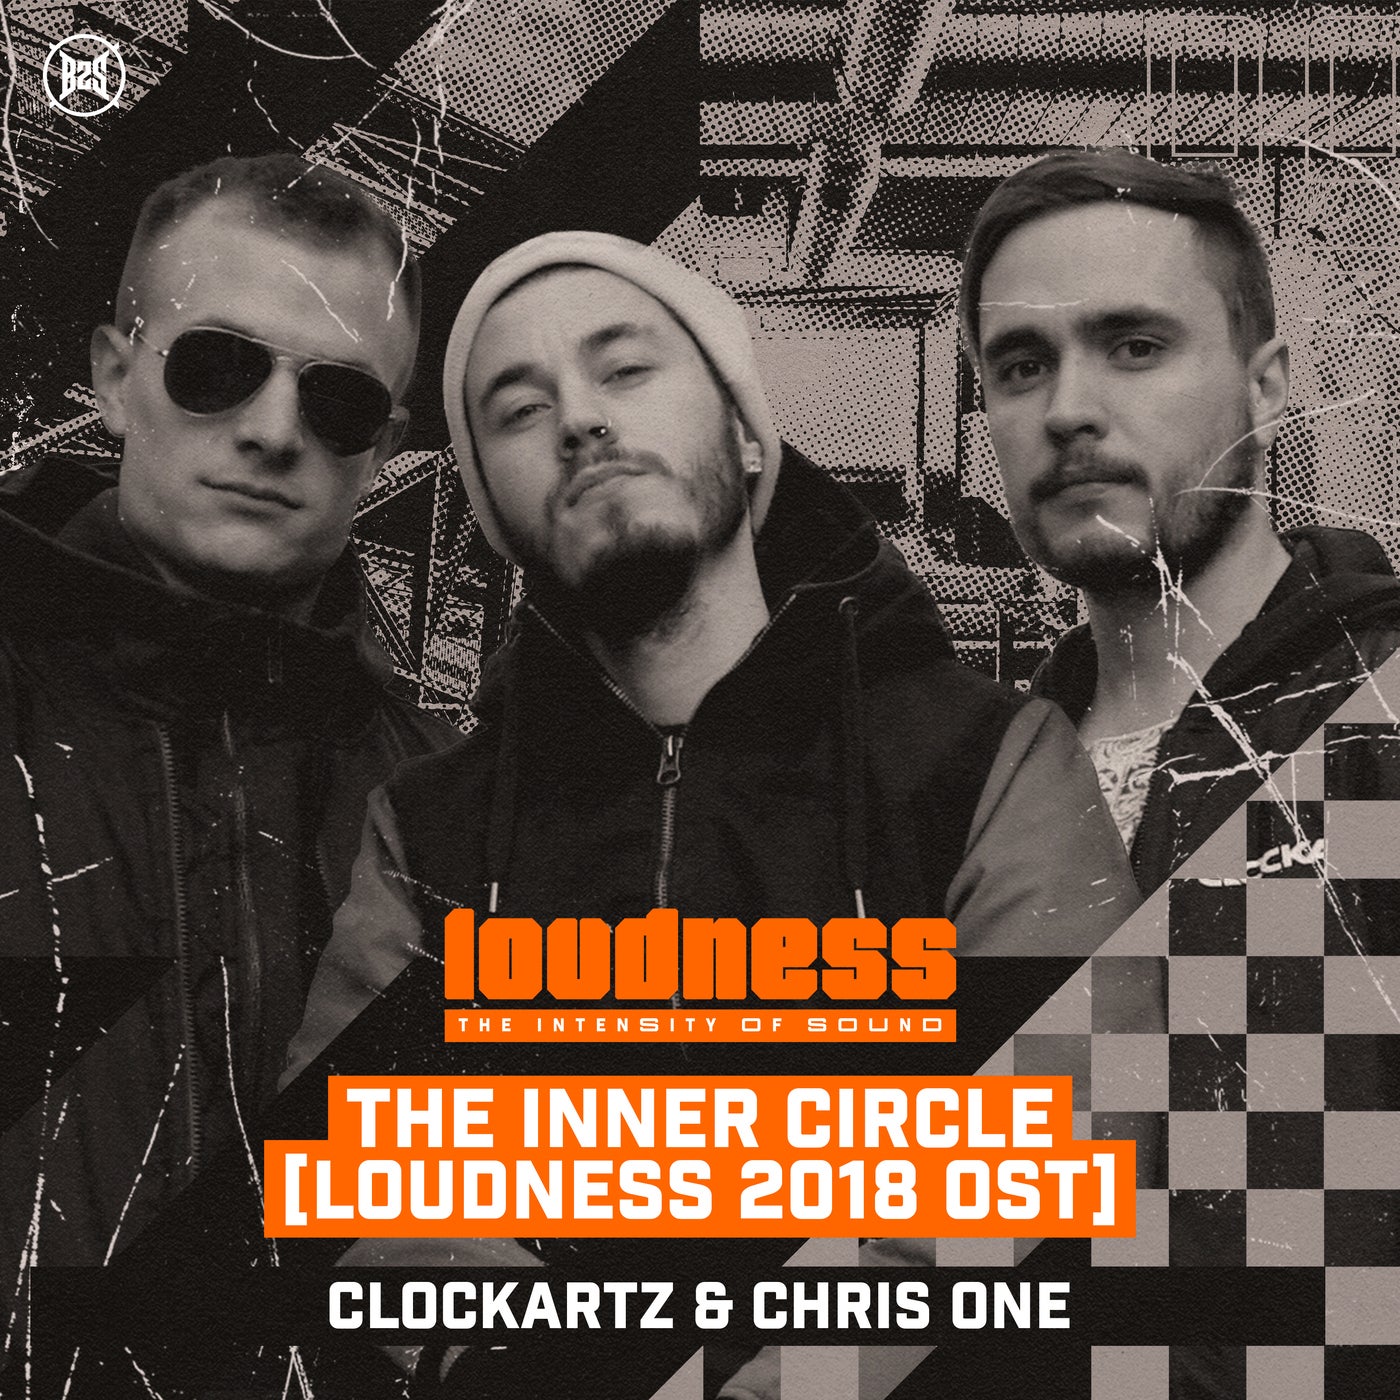 The Inner Circle (Loudness 2018 OST)